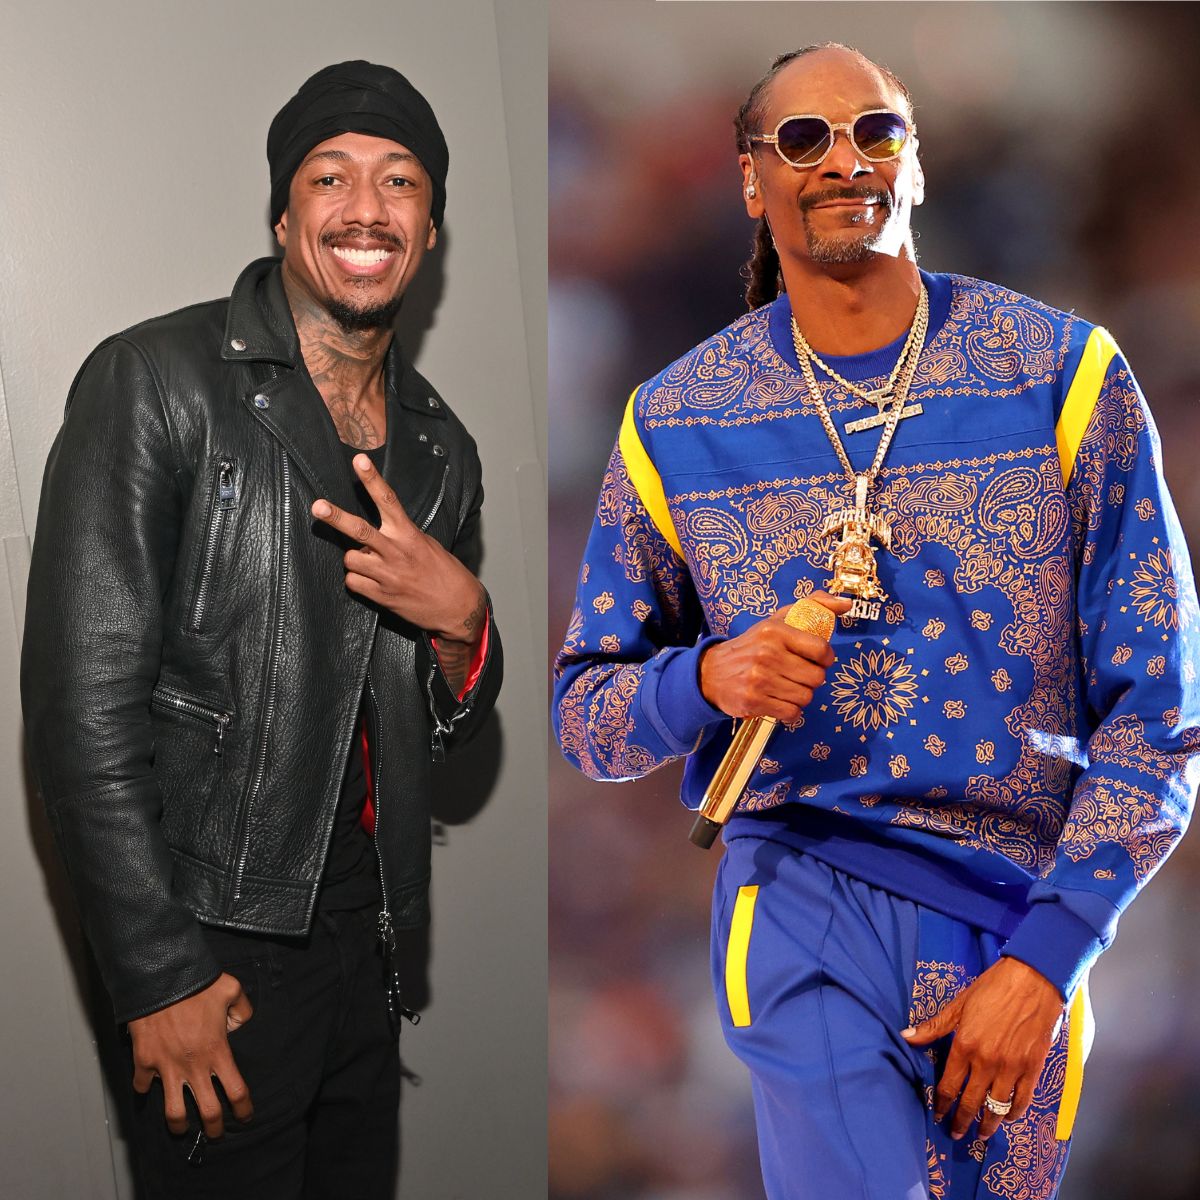 Is Nick Cannon related to Snoop Dogg